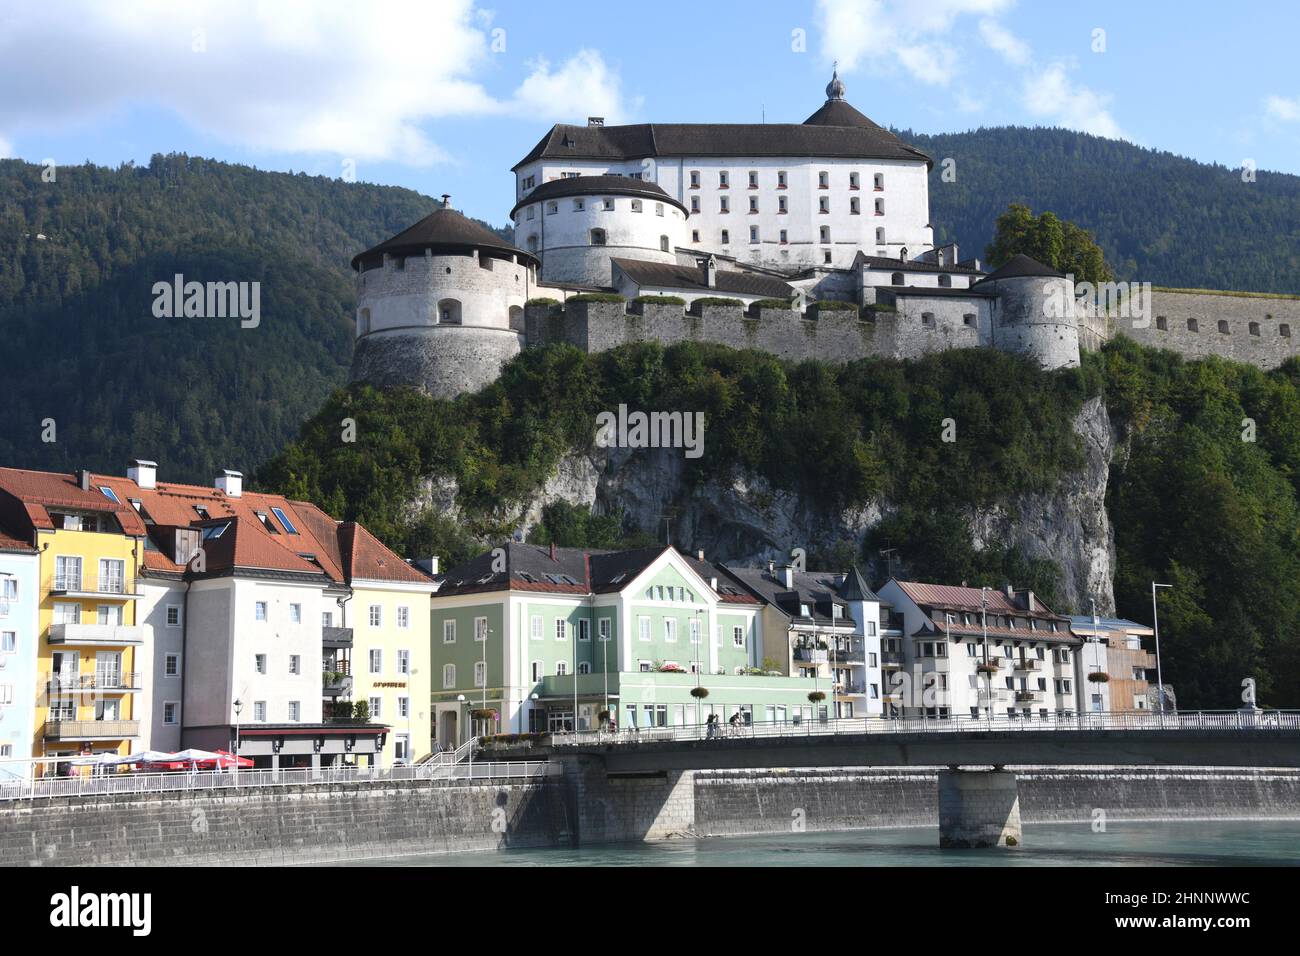 In 1205 the Kufstein Fortress in Austria,Tyrol was first mentioned in a document. The fortress is the landmark of Kufstein. It is located on the 90m high rock mountain directly on the river Inn. Stock Photo